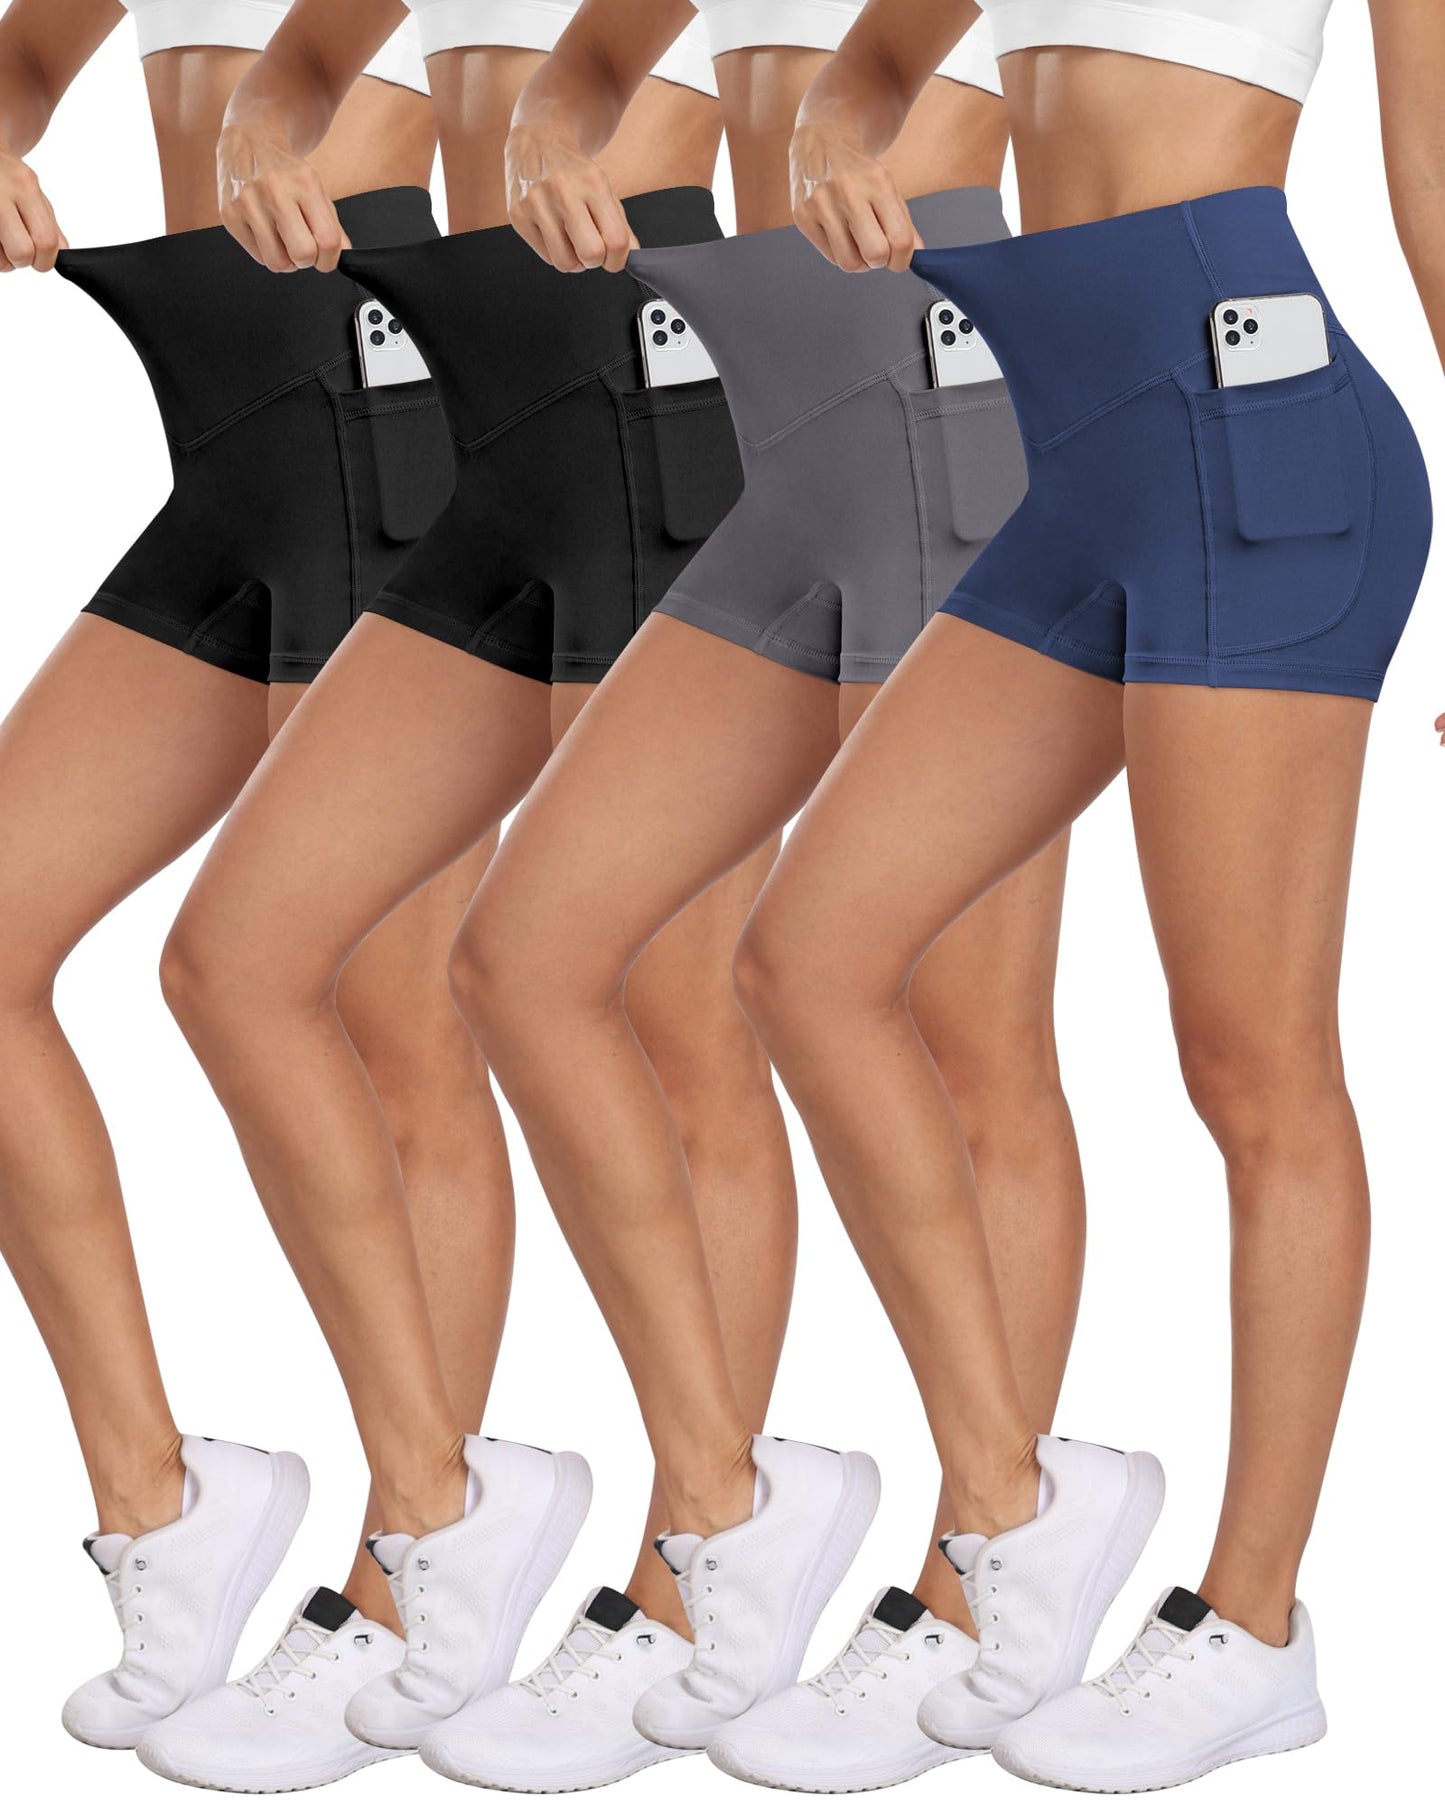 NORMOV 4 Packs Spandex Yoga Shorts Women with Pockets, 3'' High Waisted Tummy Control Booty Shorts